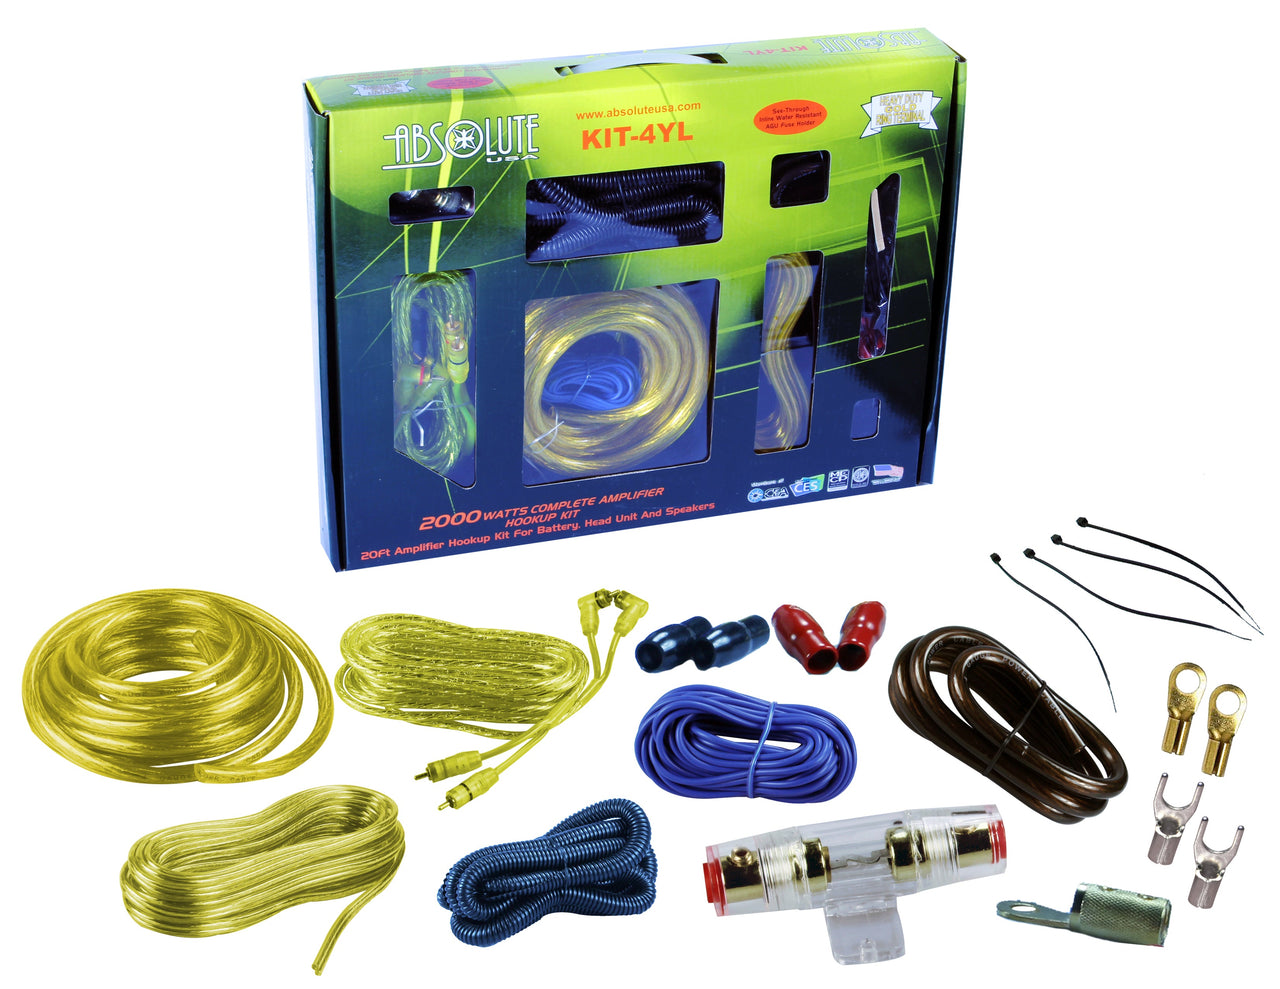 Absolute KIT4YL AMP KIT<br/>Complete PRO Marine Auto Car RV 4 Gauge 2000 Watts Amplifier Complete Installation Amp Kit Power Wiring with Yellow Accent Color Scheme